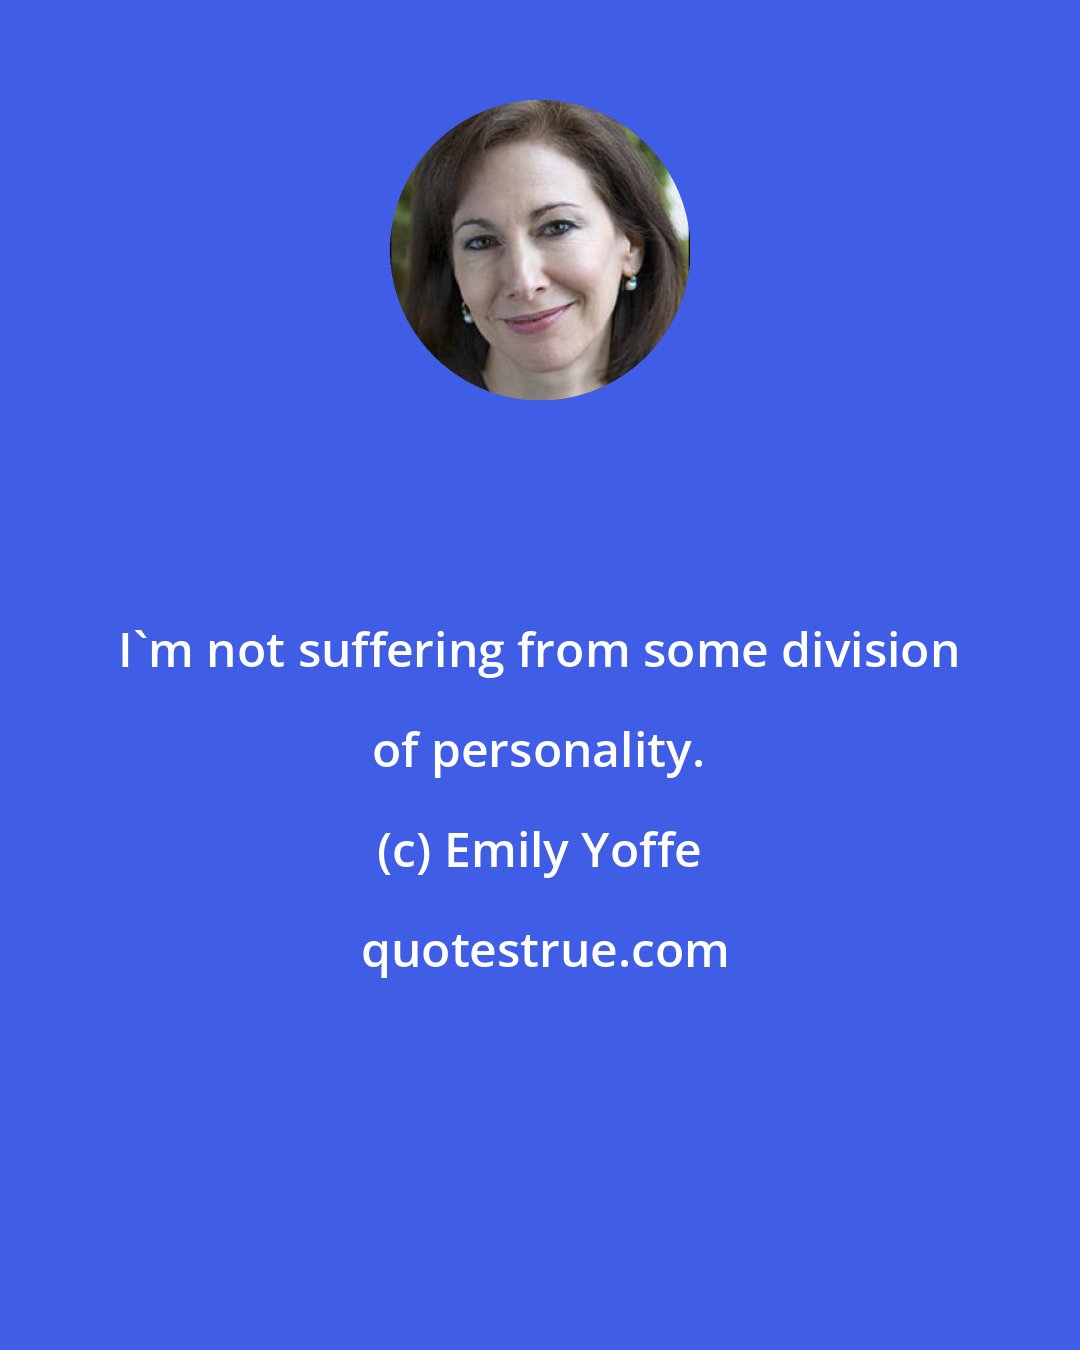 Emily Yoffe: I'm not suffering from some division of personality.